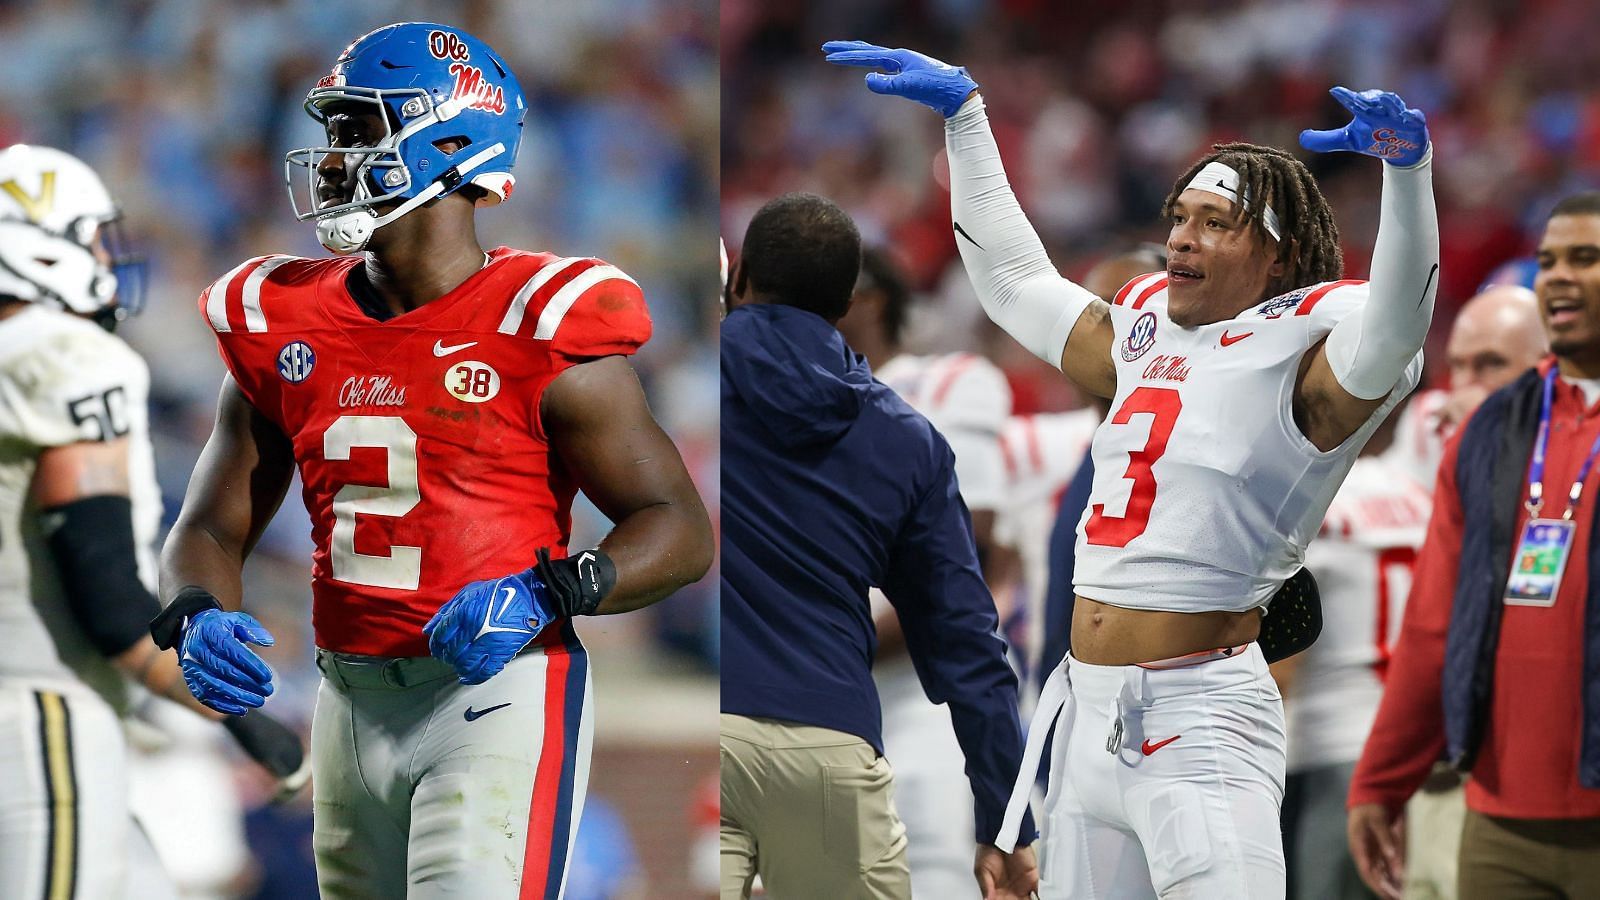 Ole Miss standouts Cedric Johnson and Daijahn Anthony are likely NFL Draft selections.